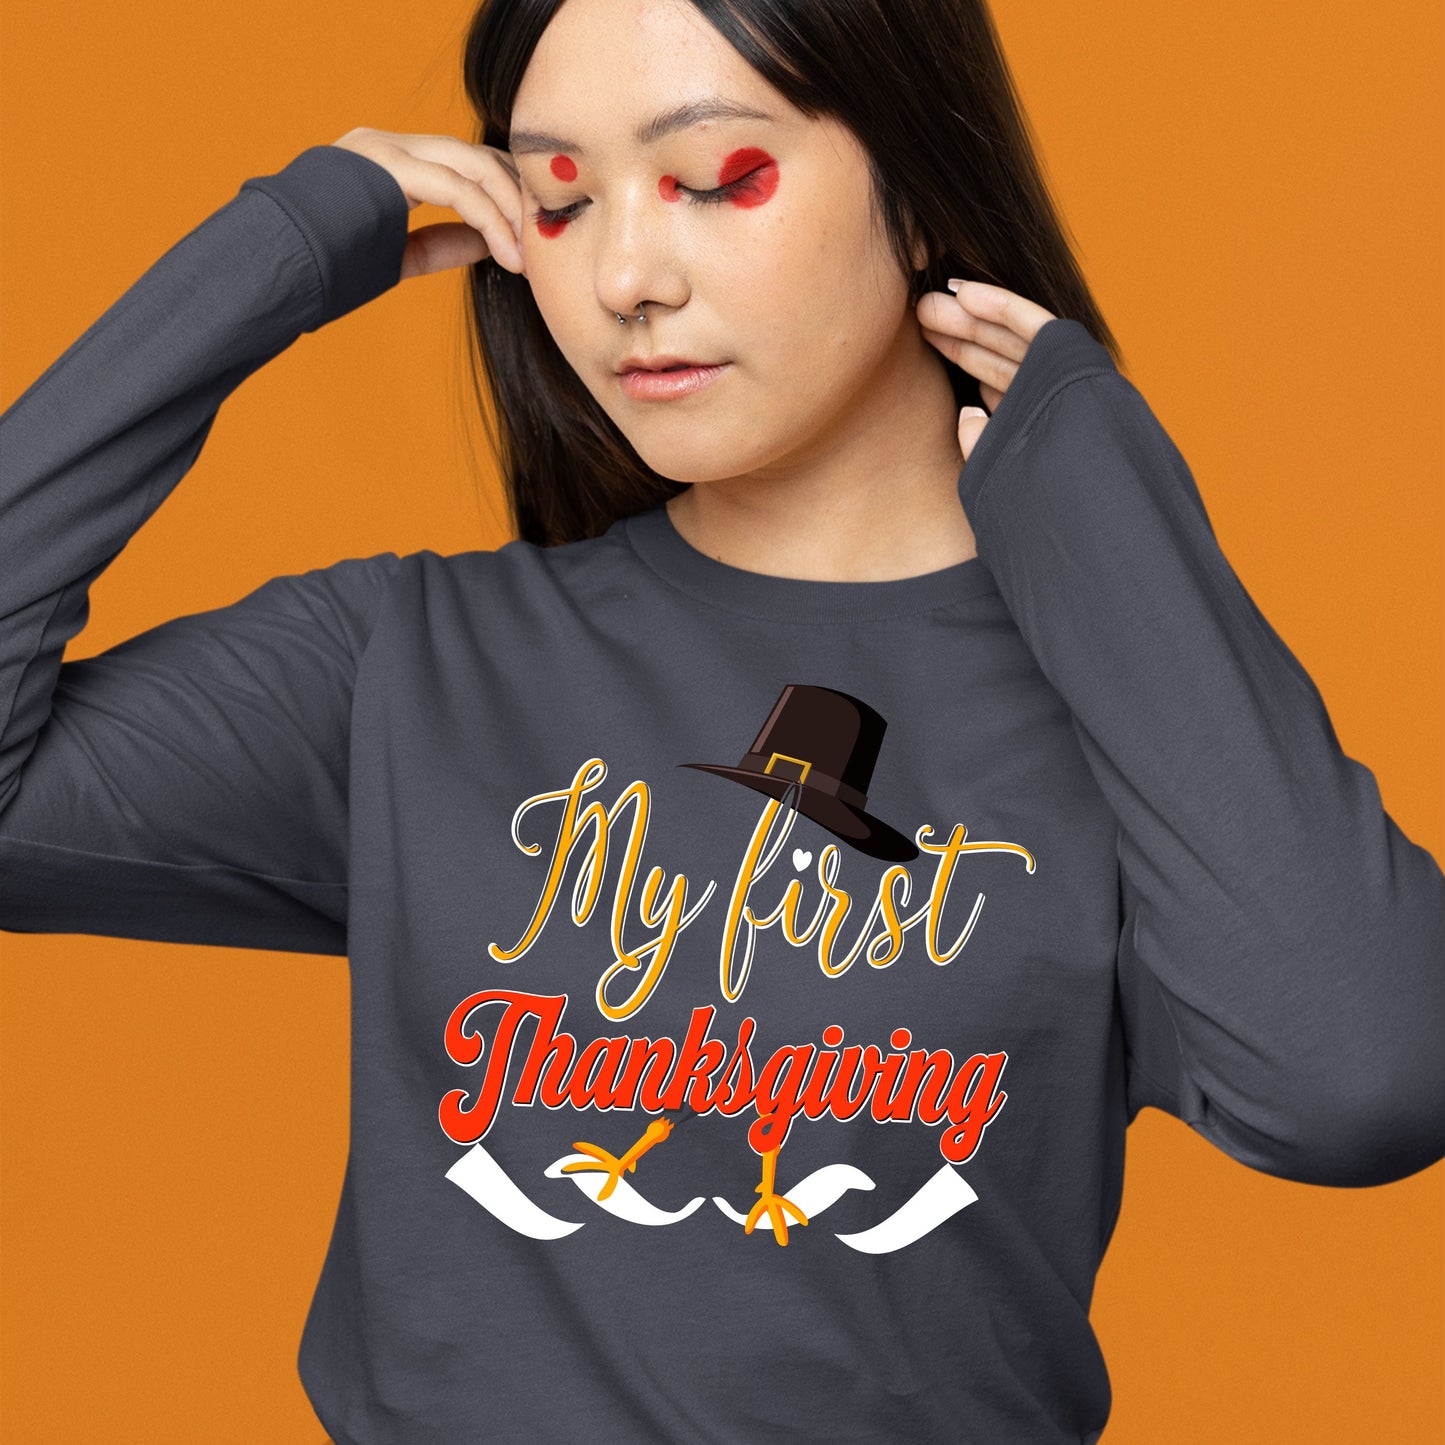 My First Thanks Giving, Thanksgiving Sweater for Women, Thanksgiving Sweatshirt, Thanksgiving Gift Ideas, Cute Thanksgiving